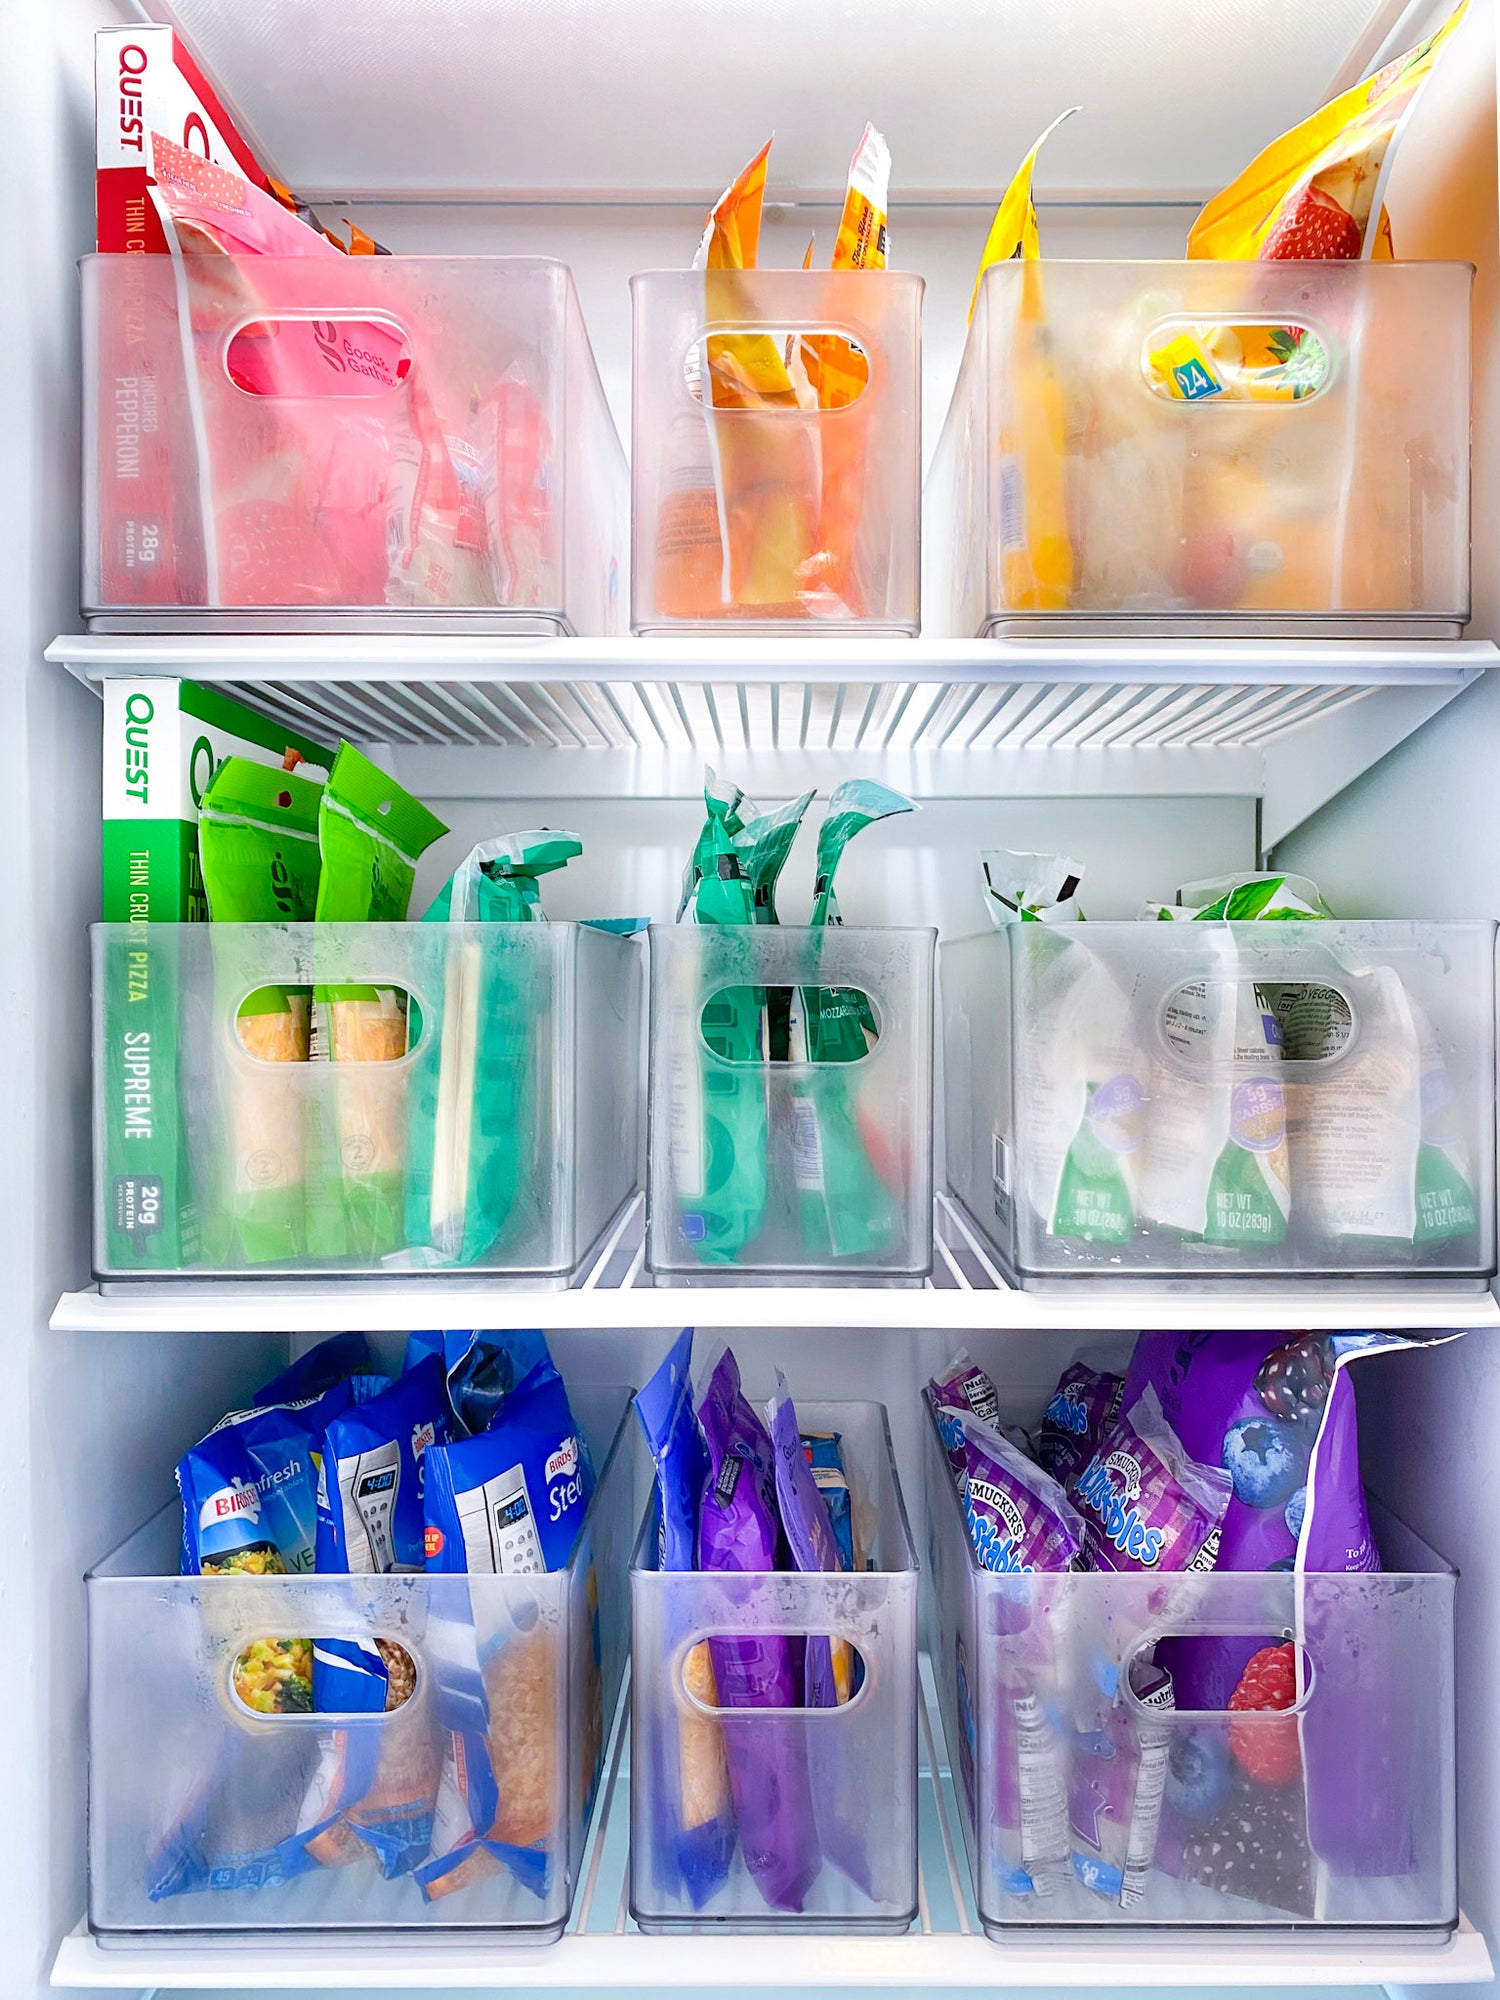 10 Rules to Organize Your Refrigerator the Right Way